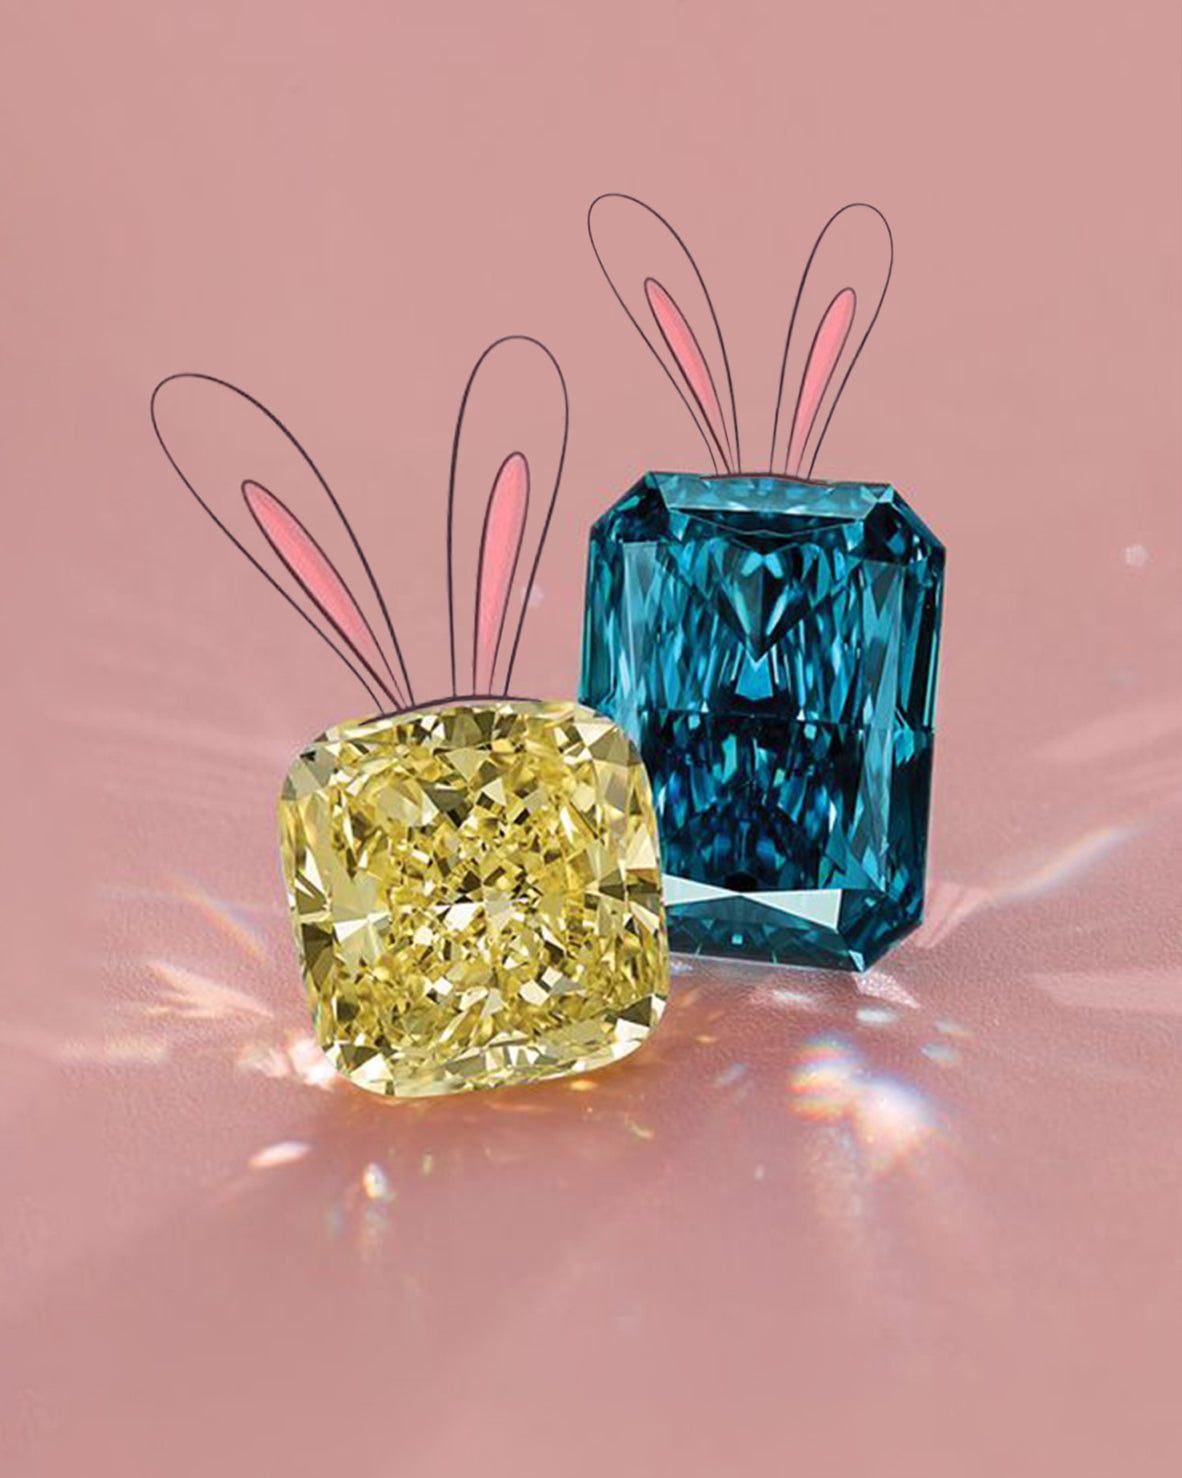 Radiate Easter Joy with Our Captivating Jewelry